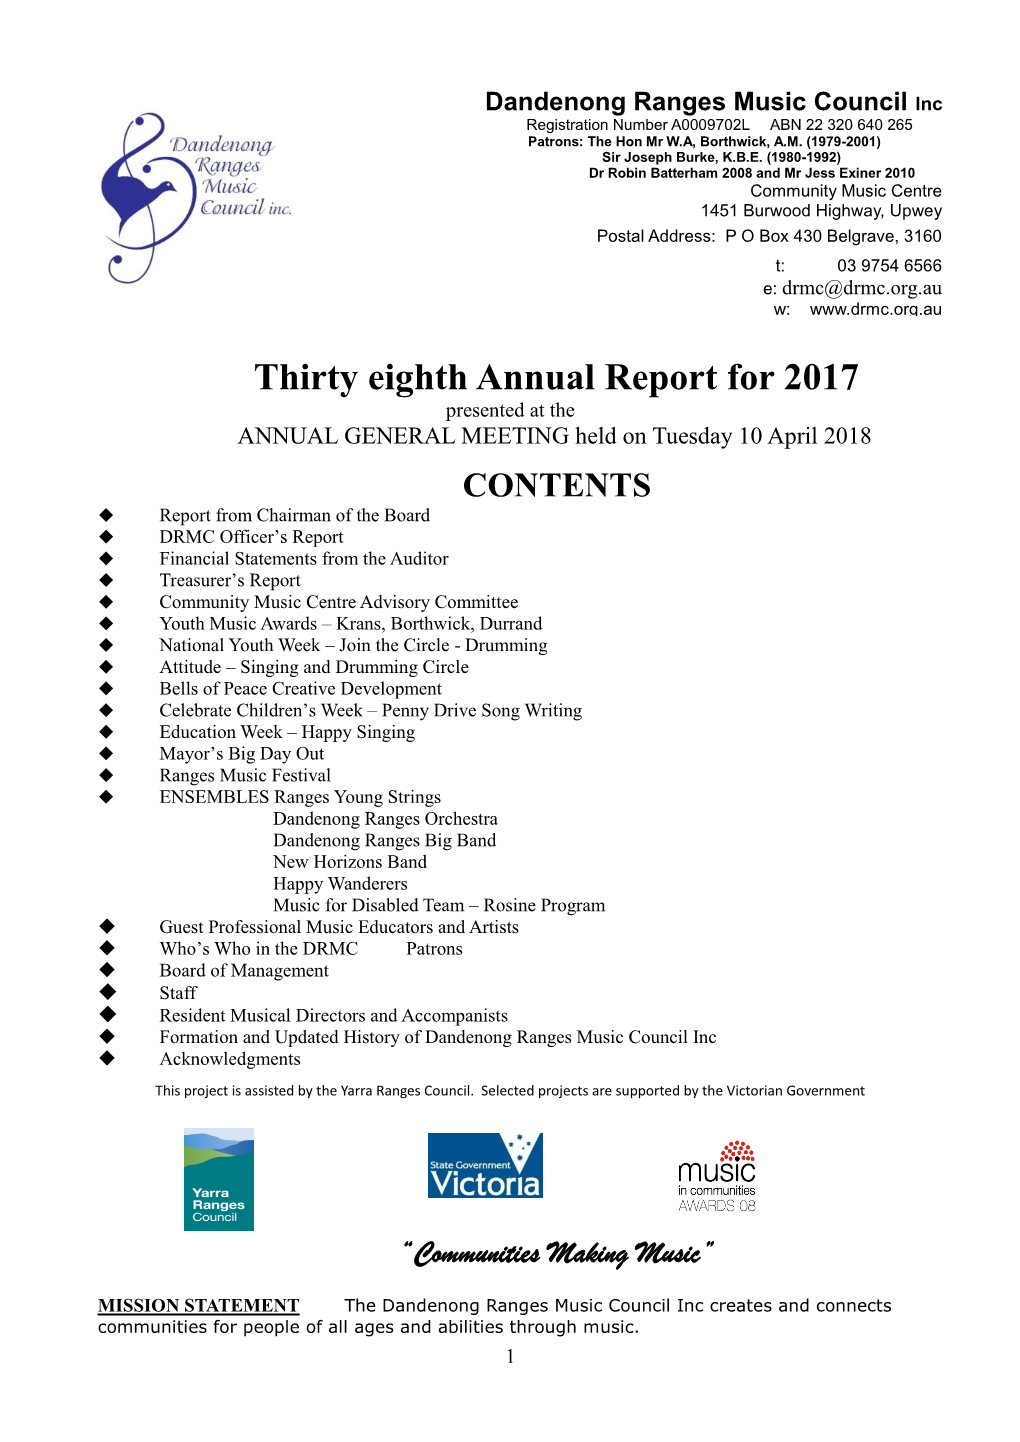 Thirty Eighth Annual Report for 2017 Presented at the ANNUAL GENERAL MEETING Held on Tuesday 10 April 2018